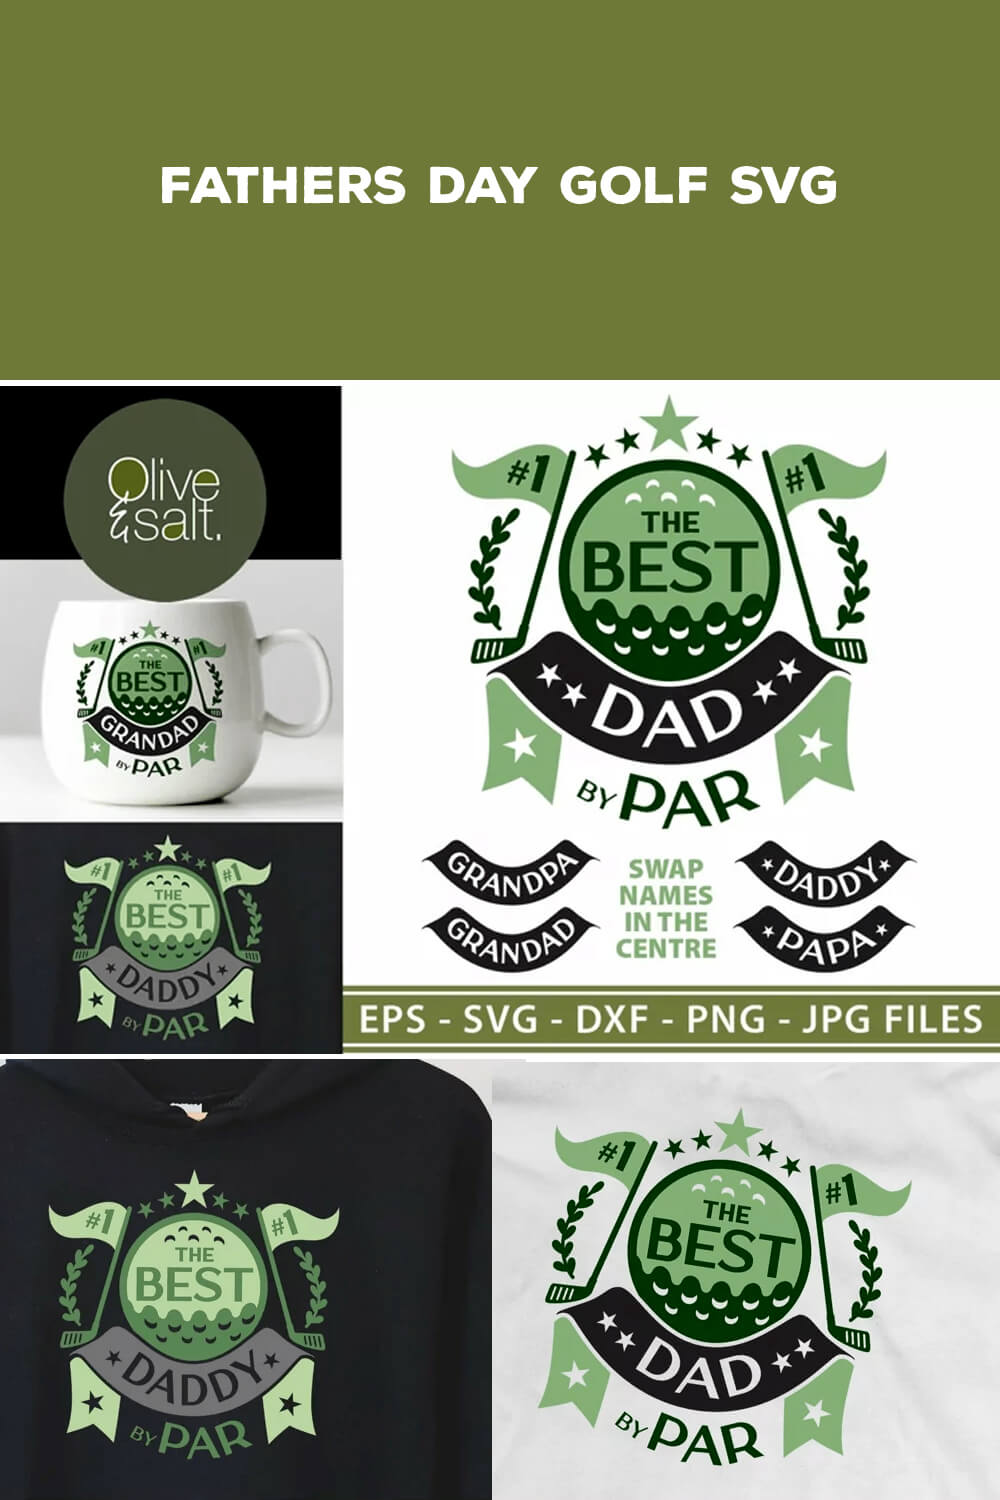 Title on olive background "Fathers day golf SVG", Father's day golf tournament logos.